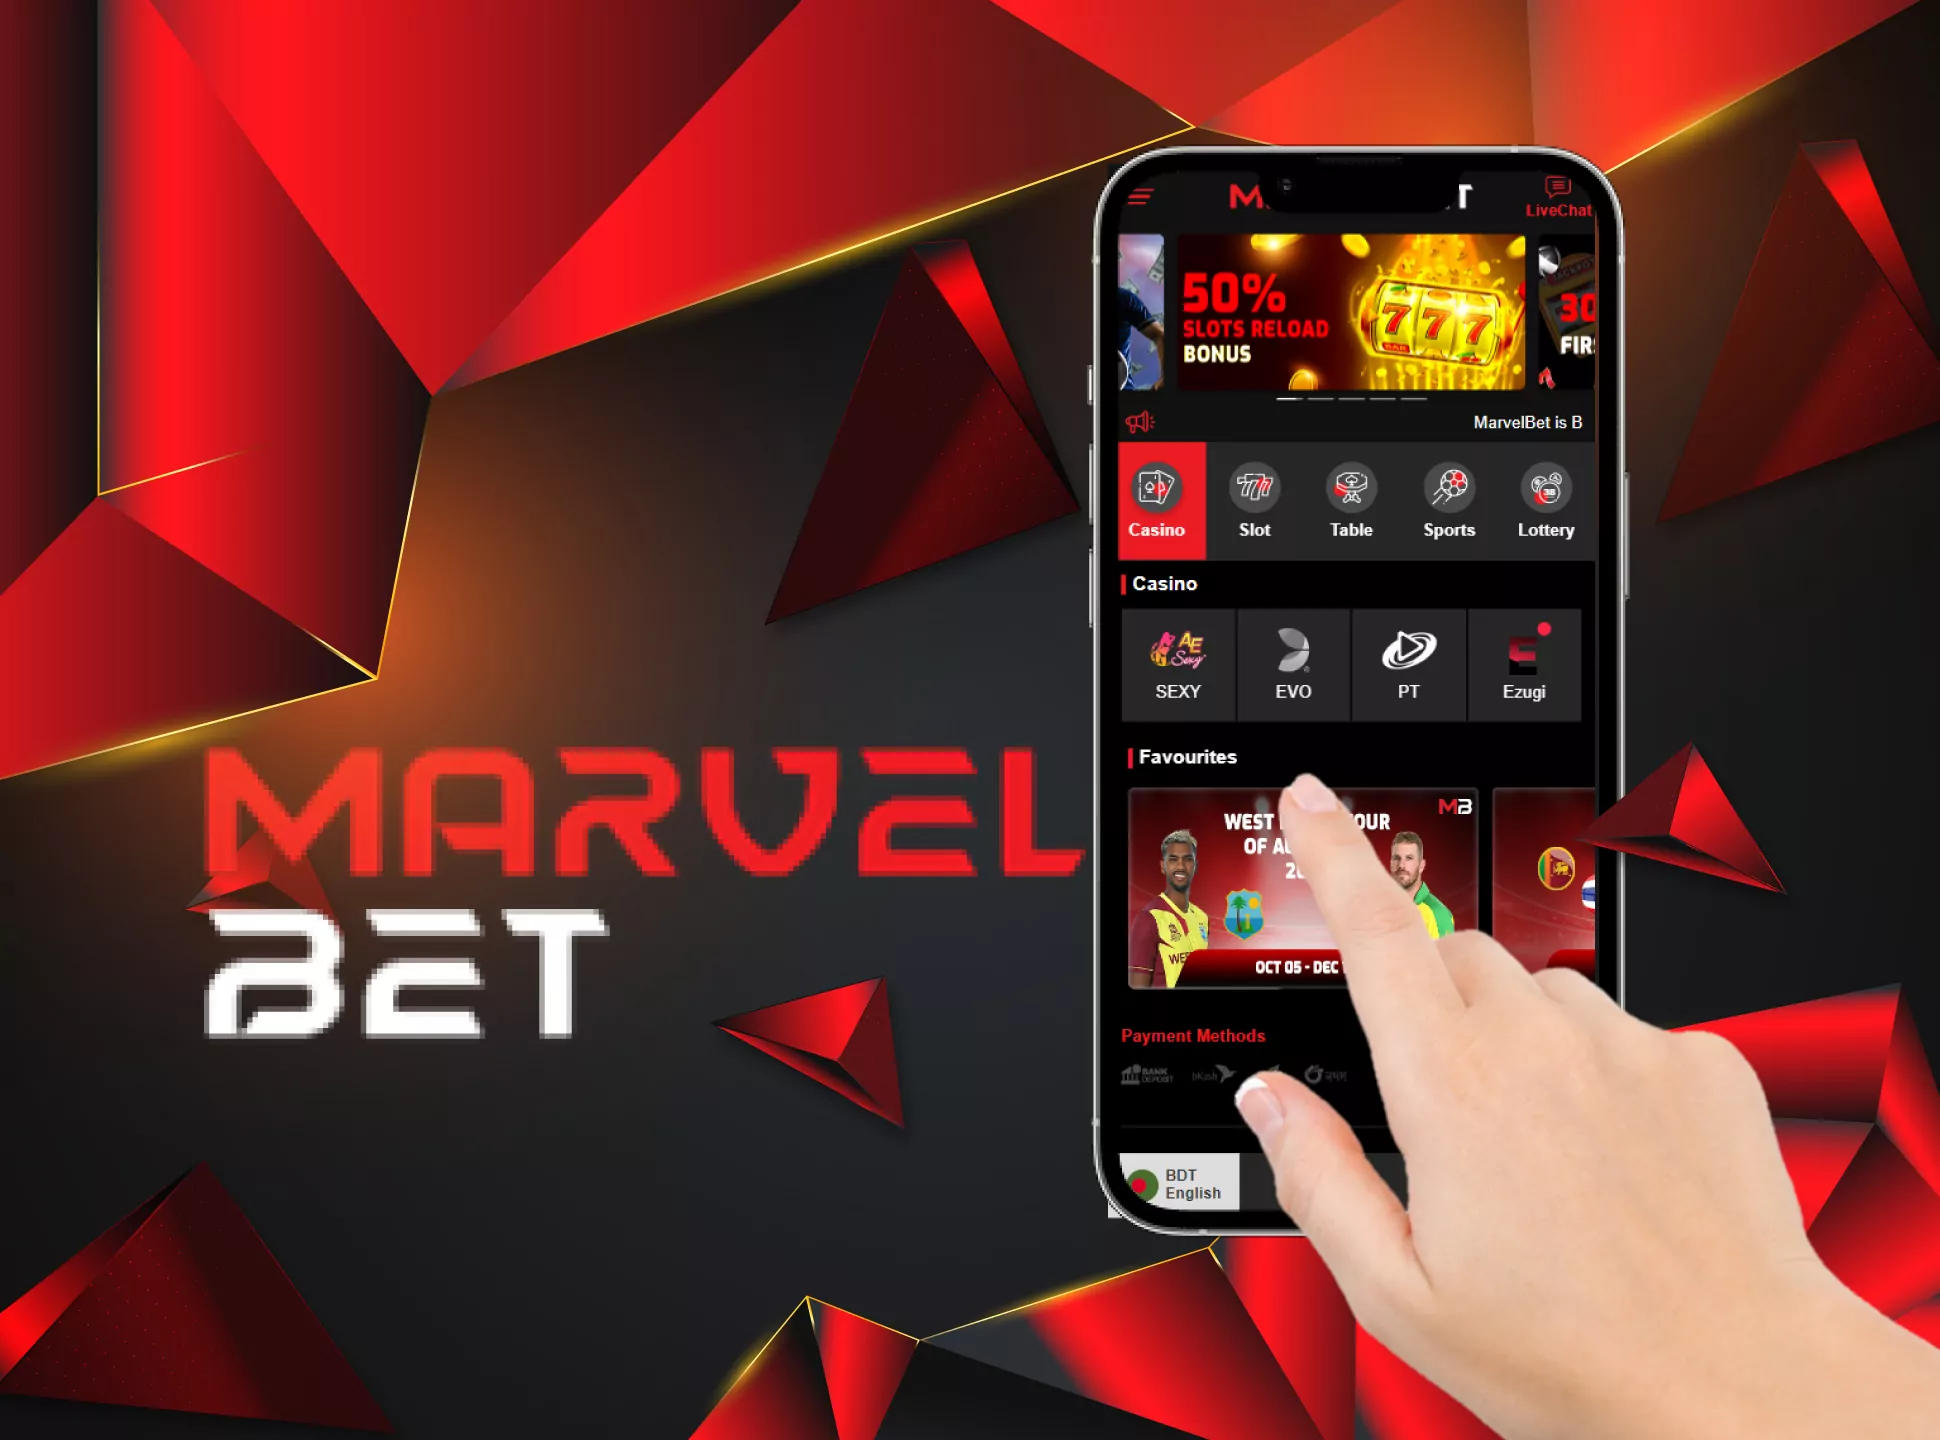 You can use the mobile version of Marvelbet instead of the app.